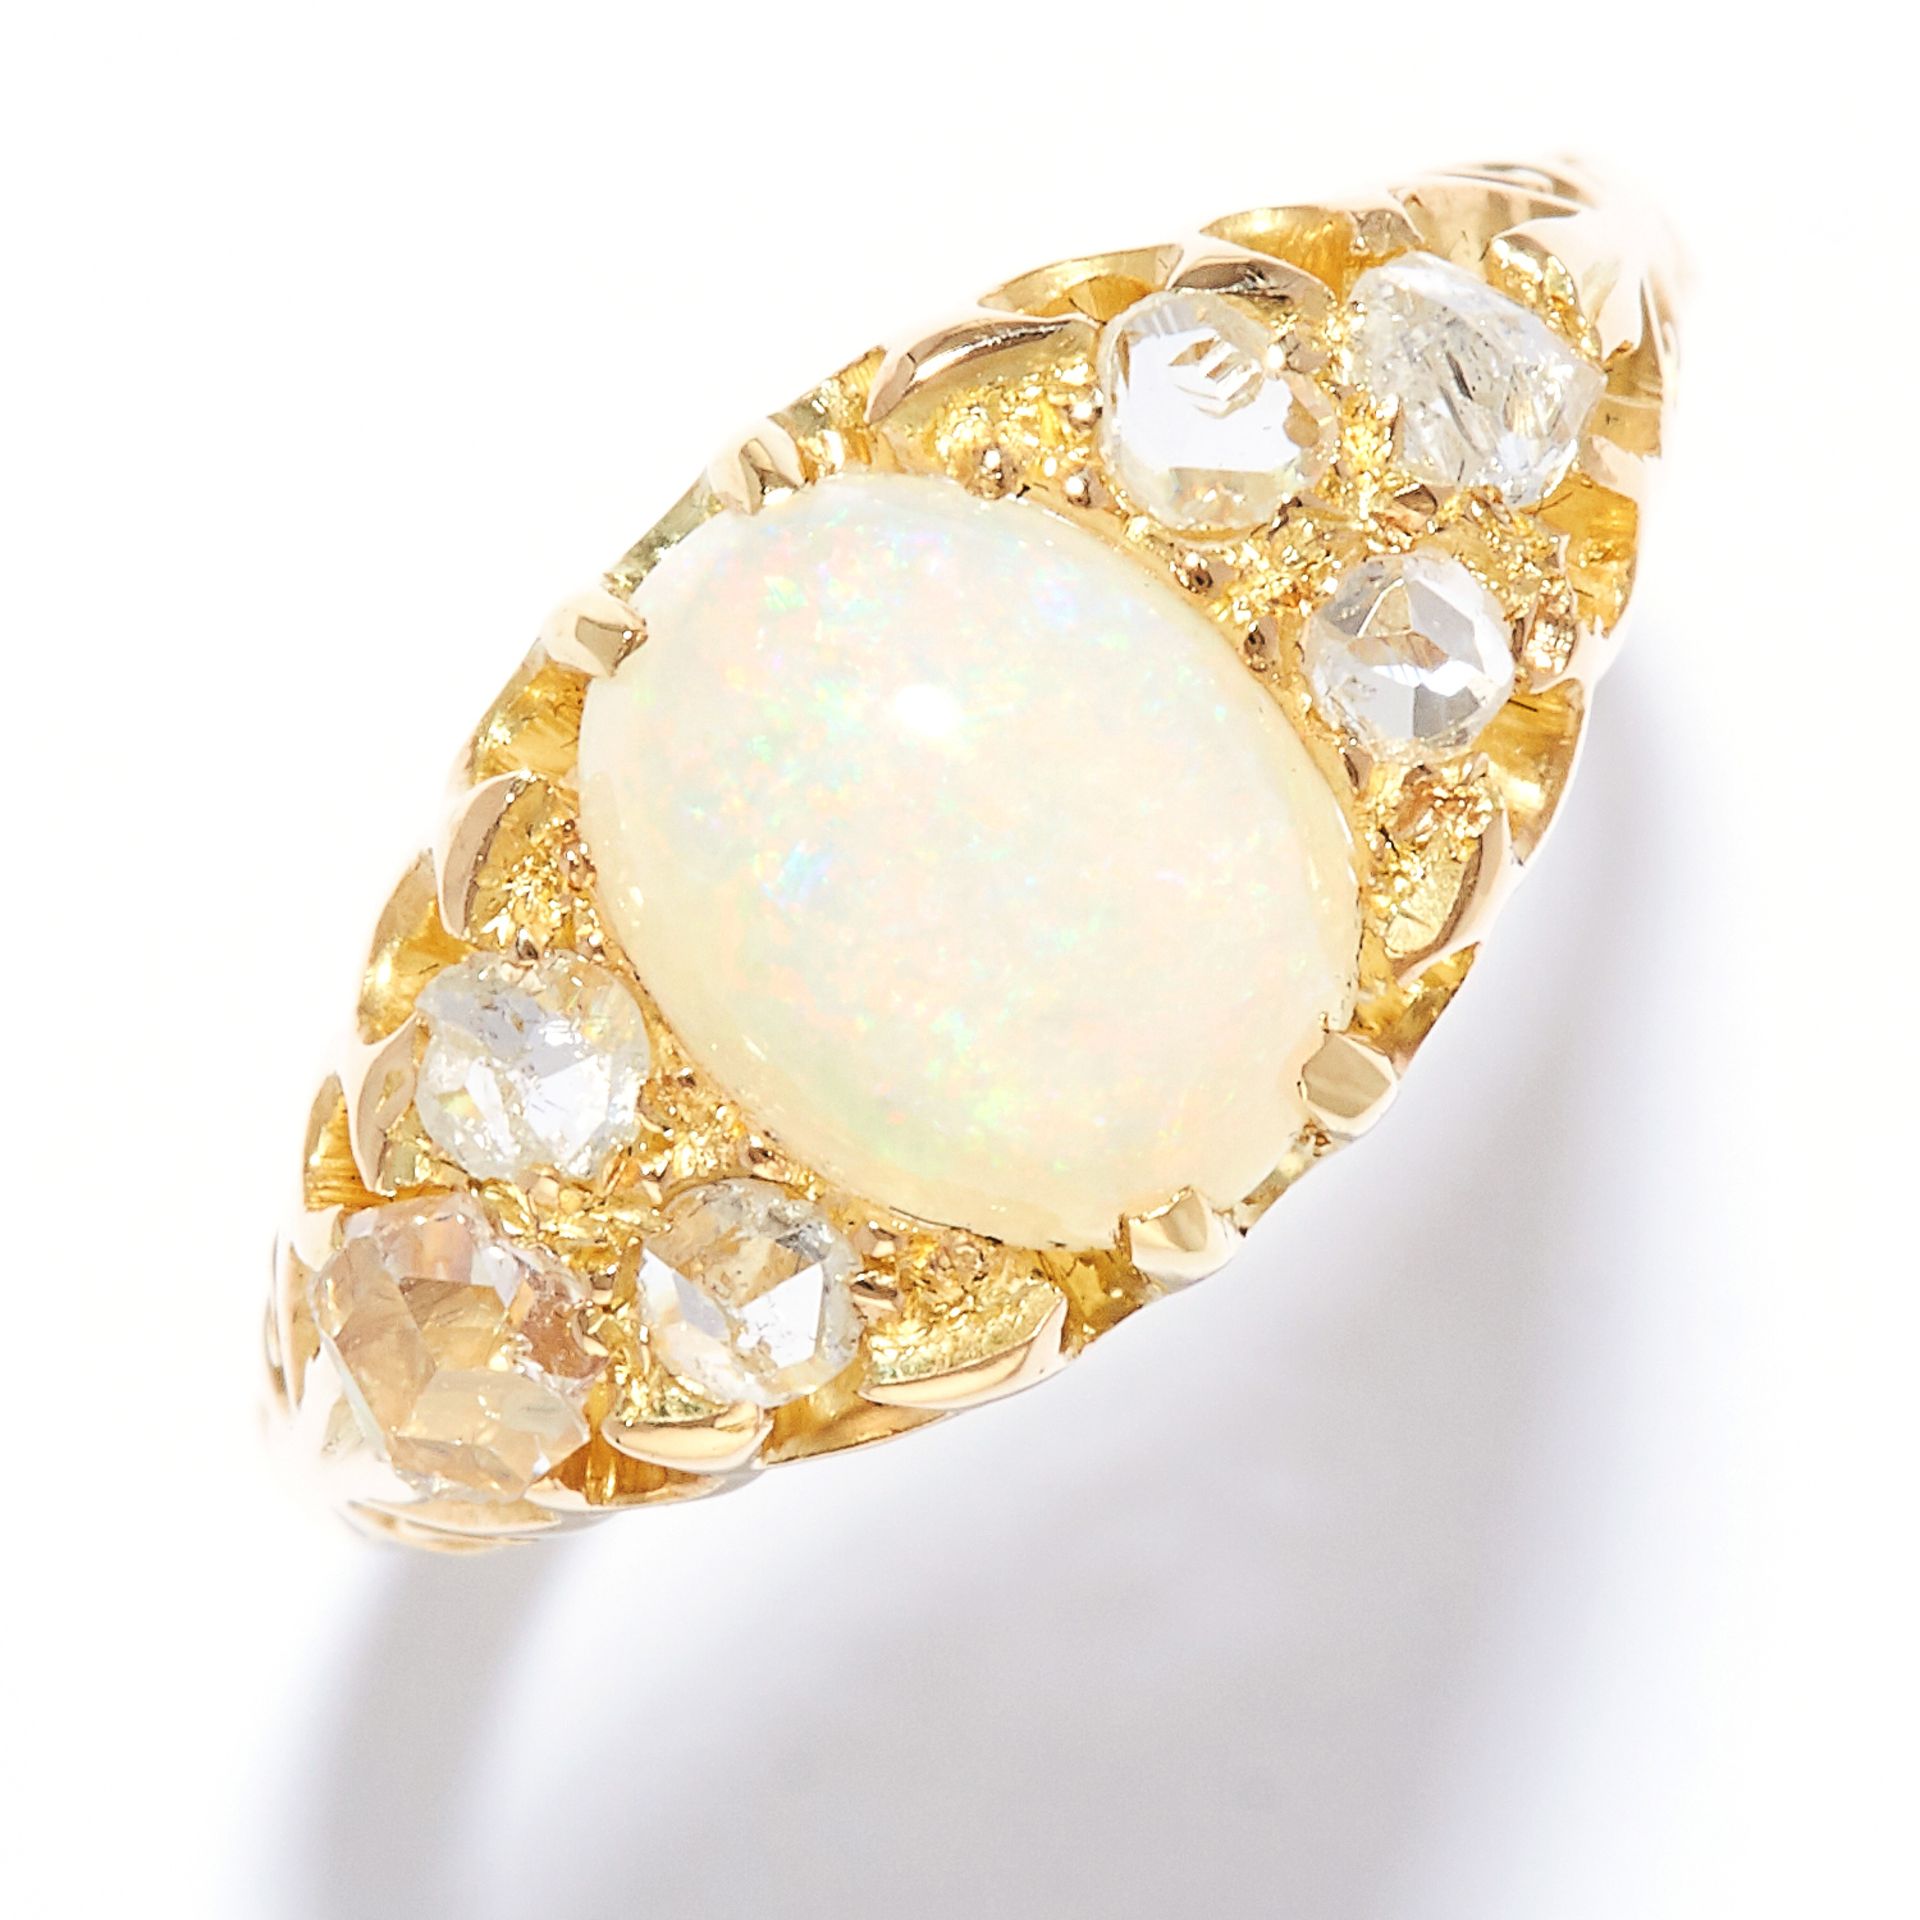 ANTIQUE OPAL AND DIAMOND DRESS RING in high carat yellow gold, set with a cabochon opal and rose cut